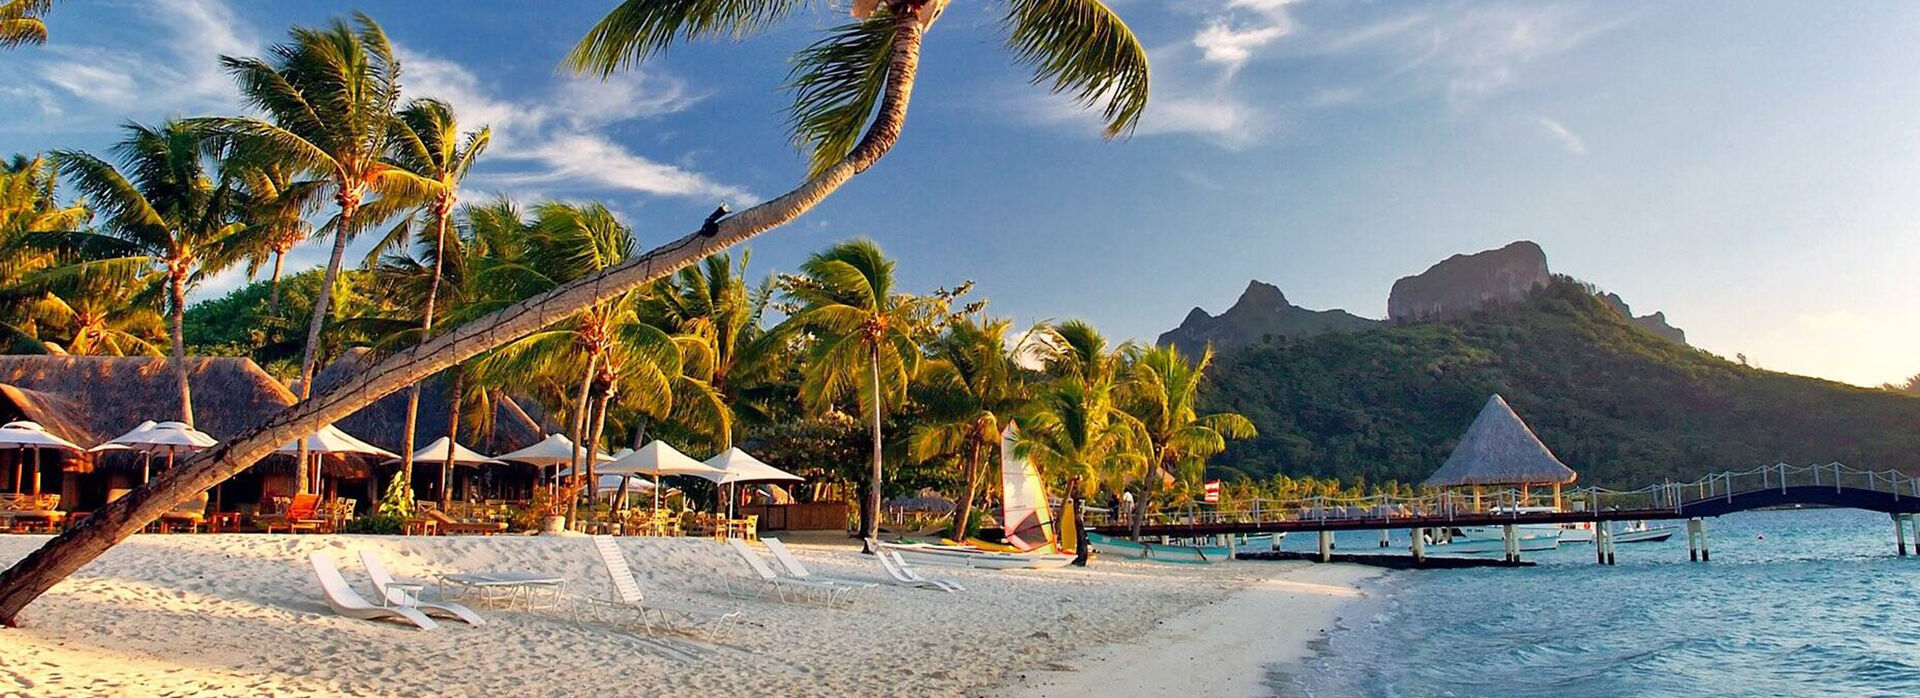 Bora Bora is one of the best pacific islands to visit